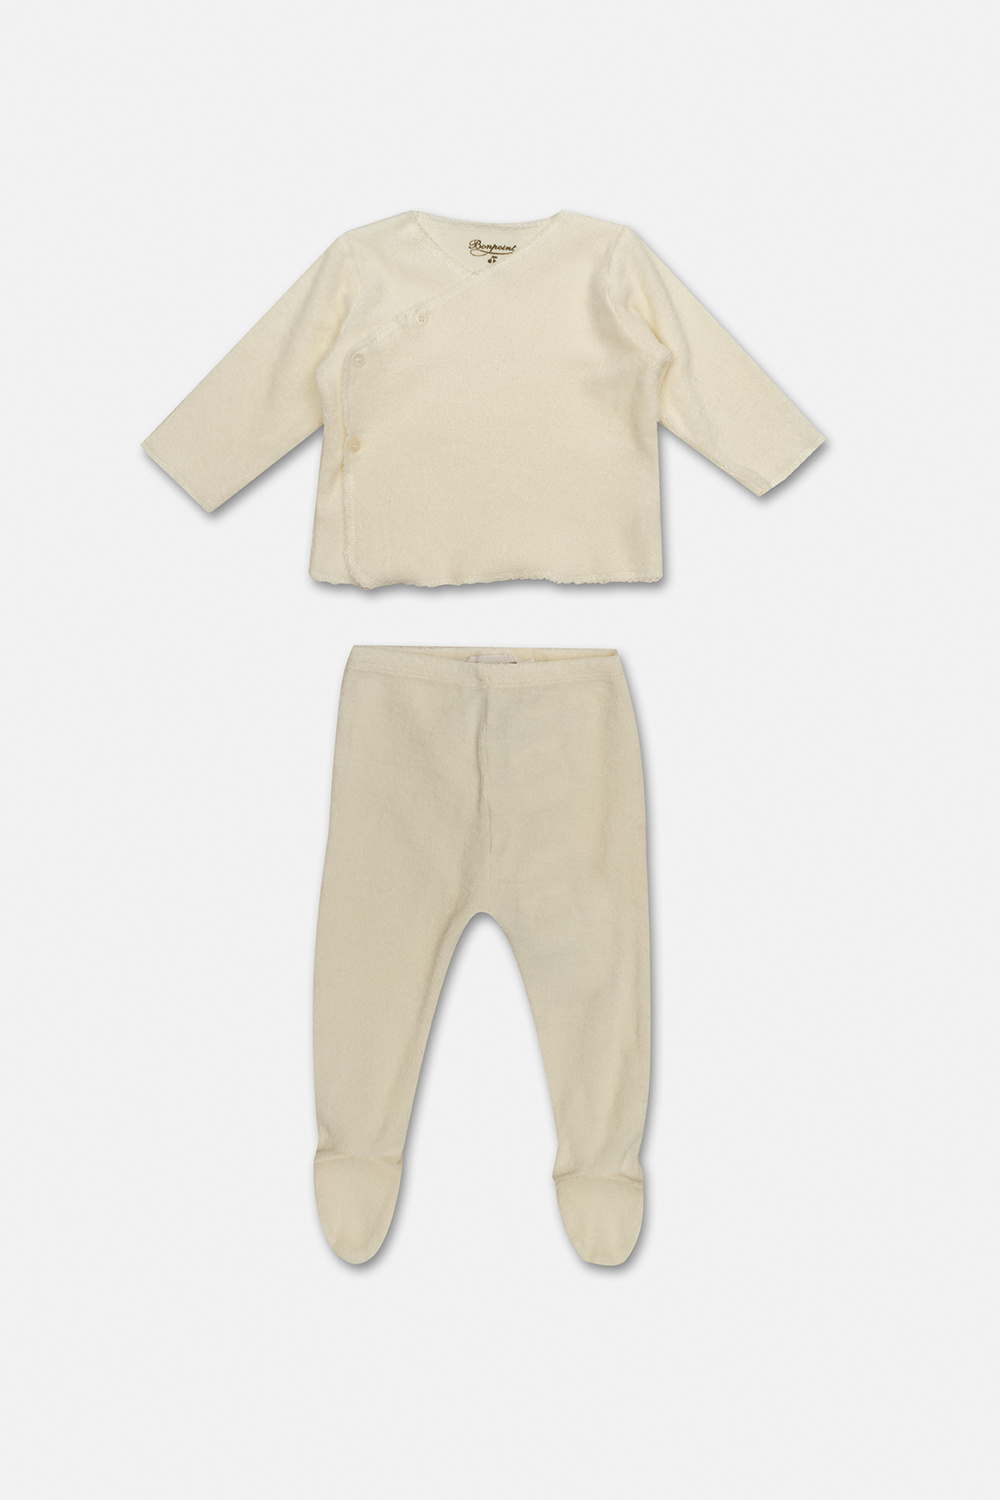 Bonpoint  Baby top and trousers set